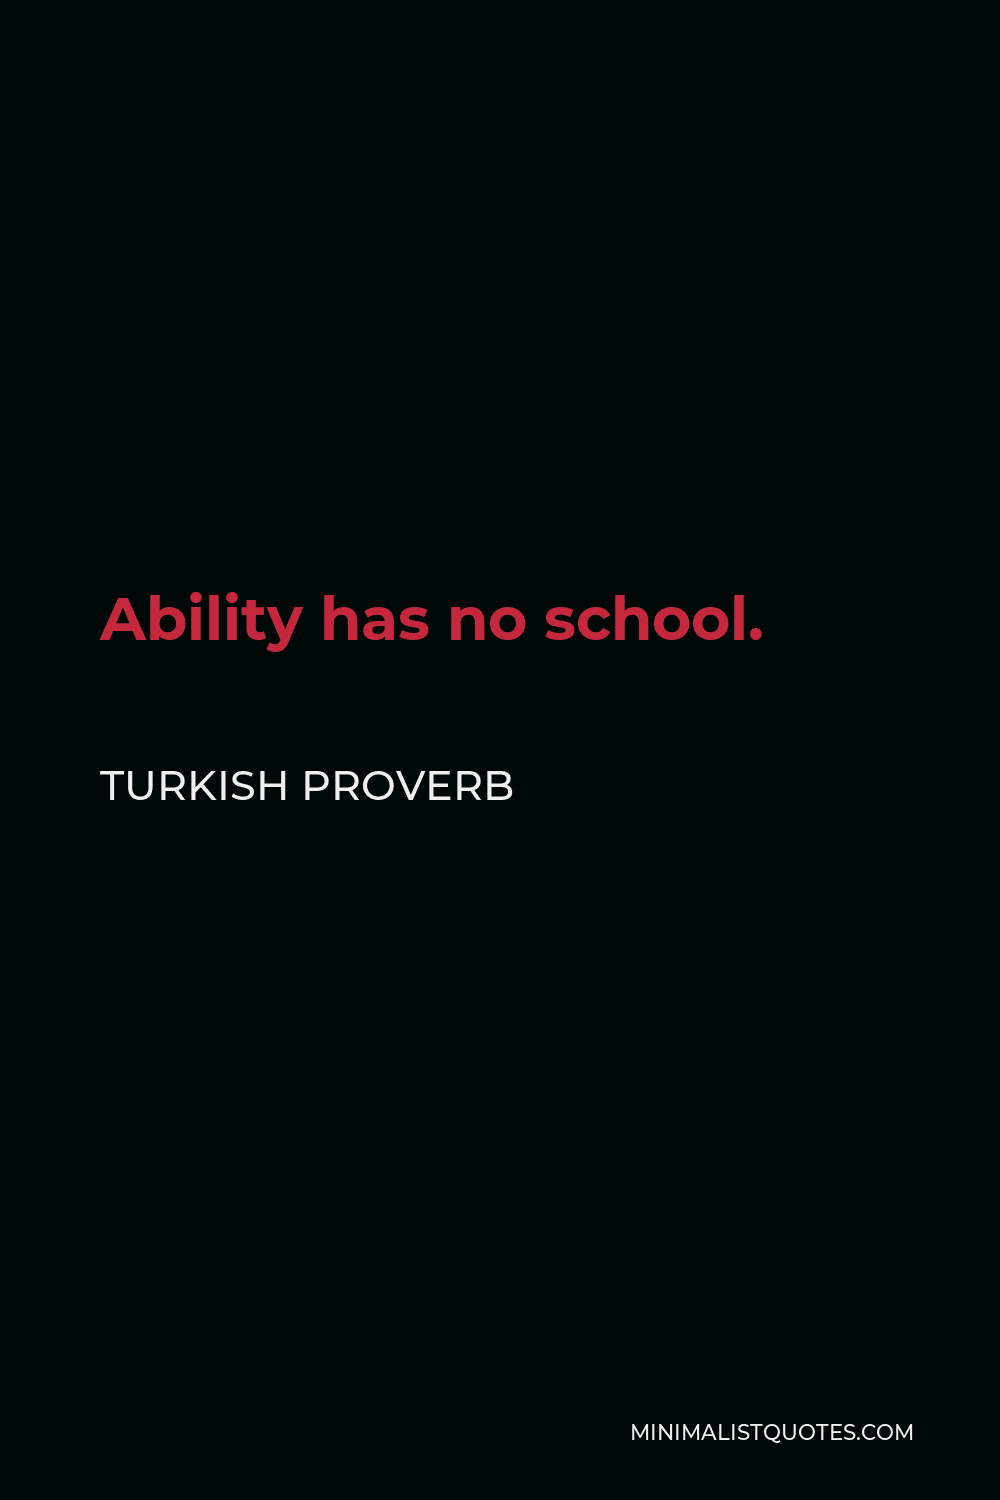 Turkish Proverb Quote - Ability has no school.